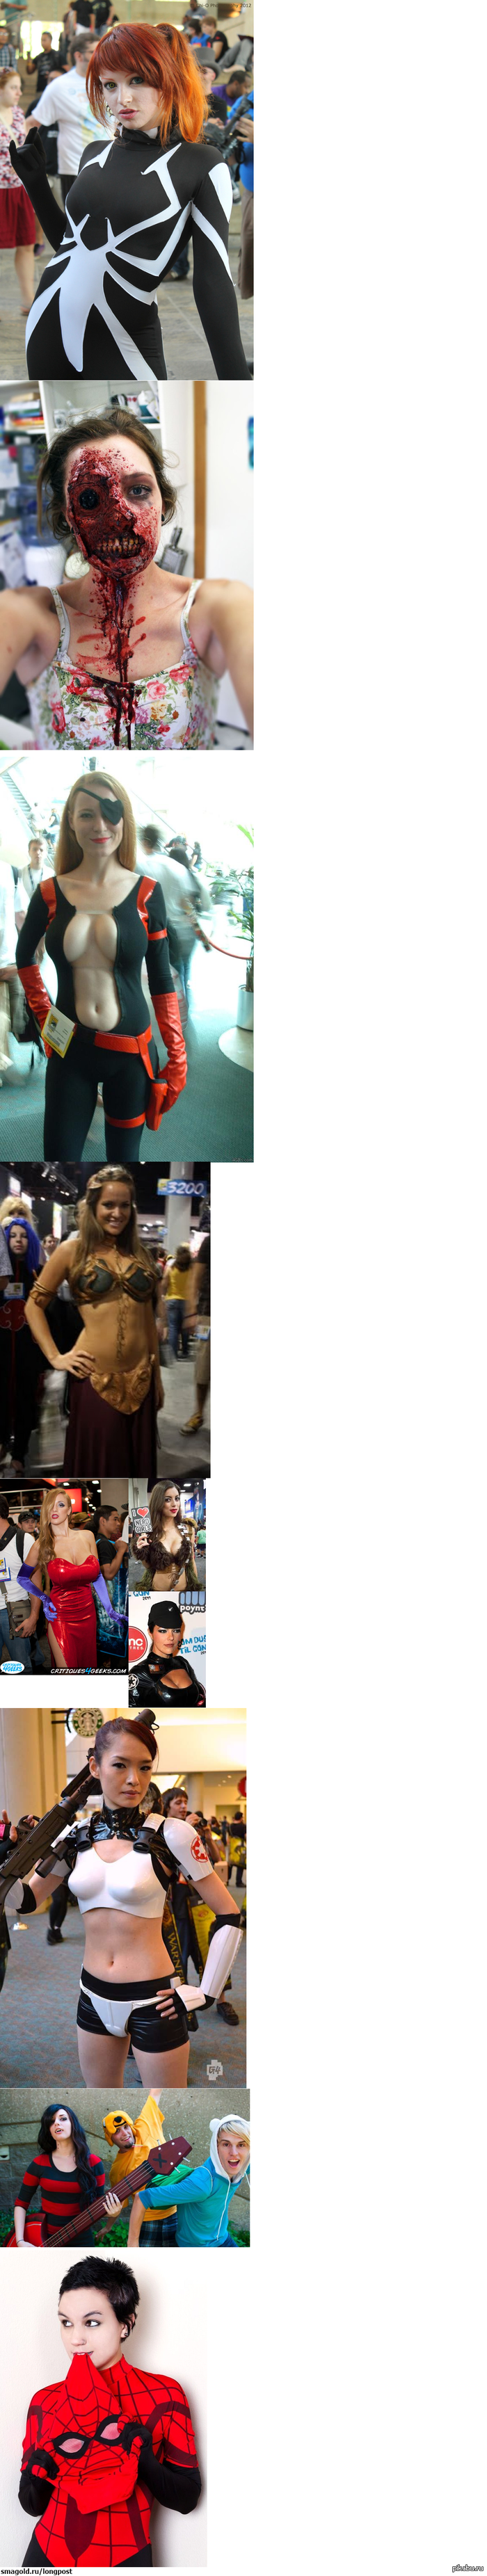 Girls and Comic Con   http://pikabu.ru/story.php?id=1342334